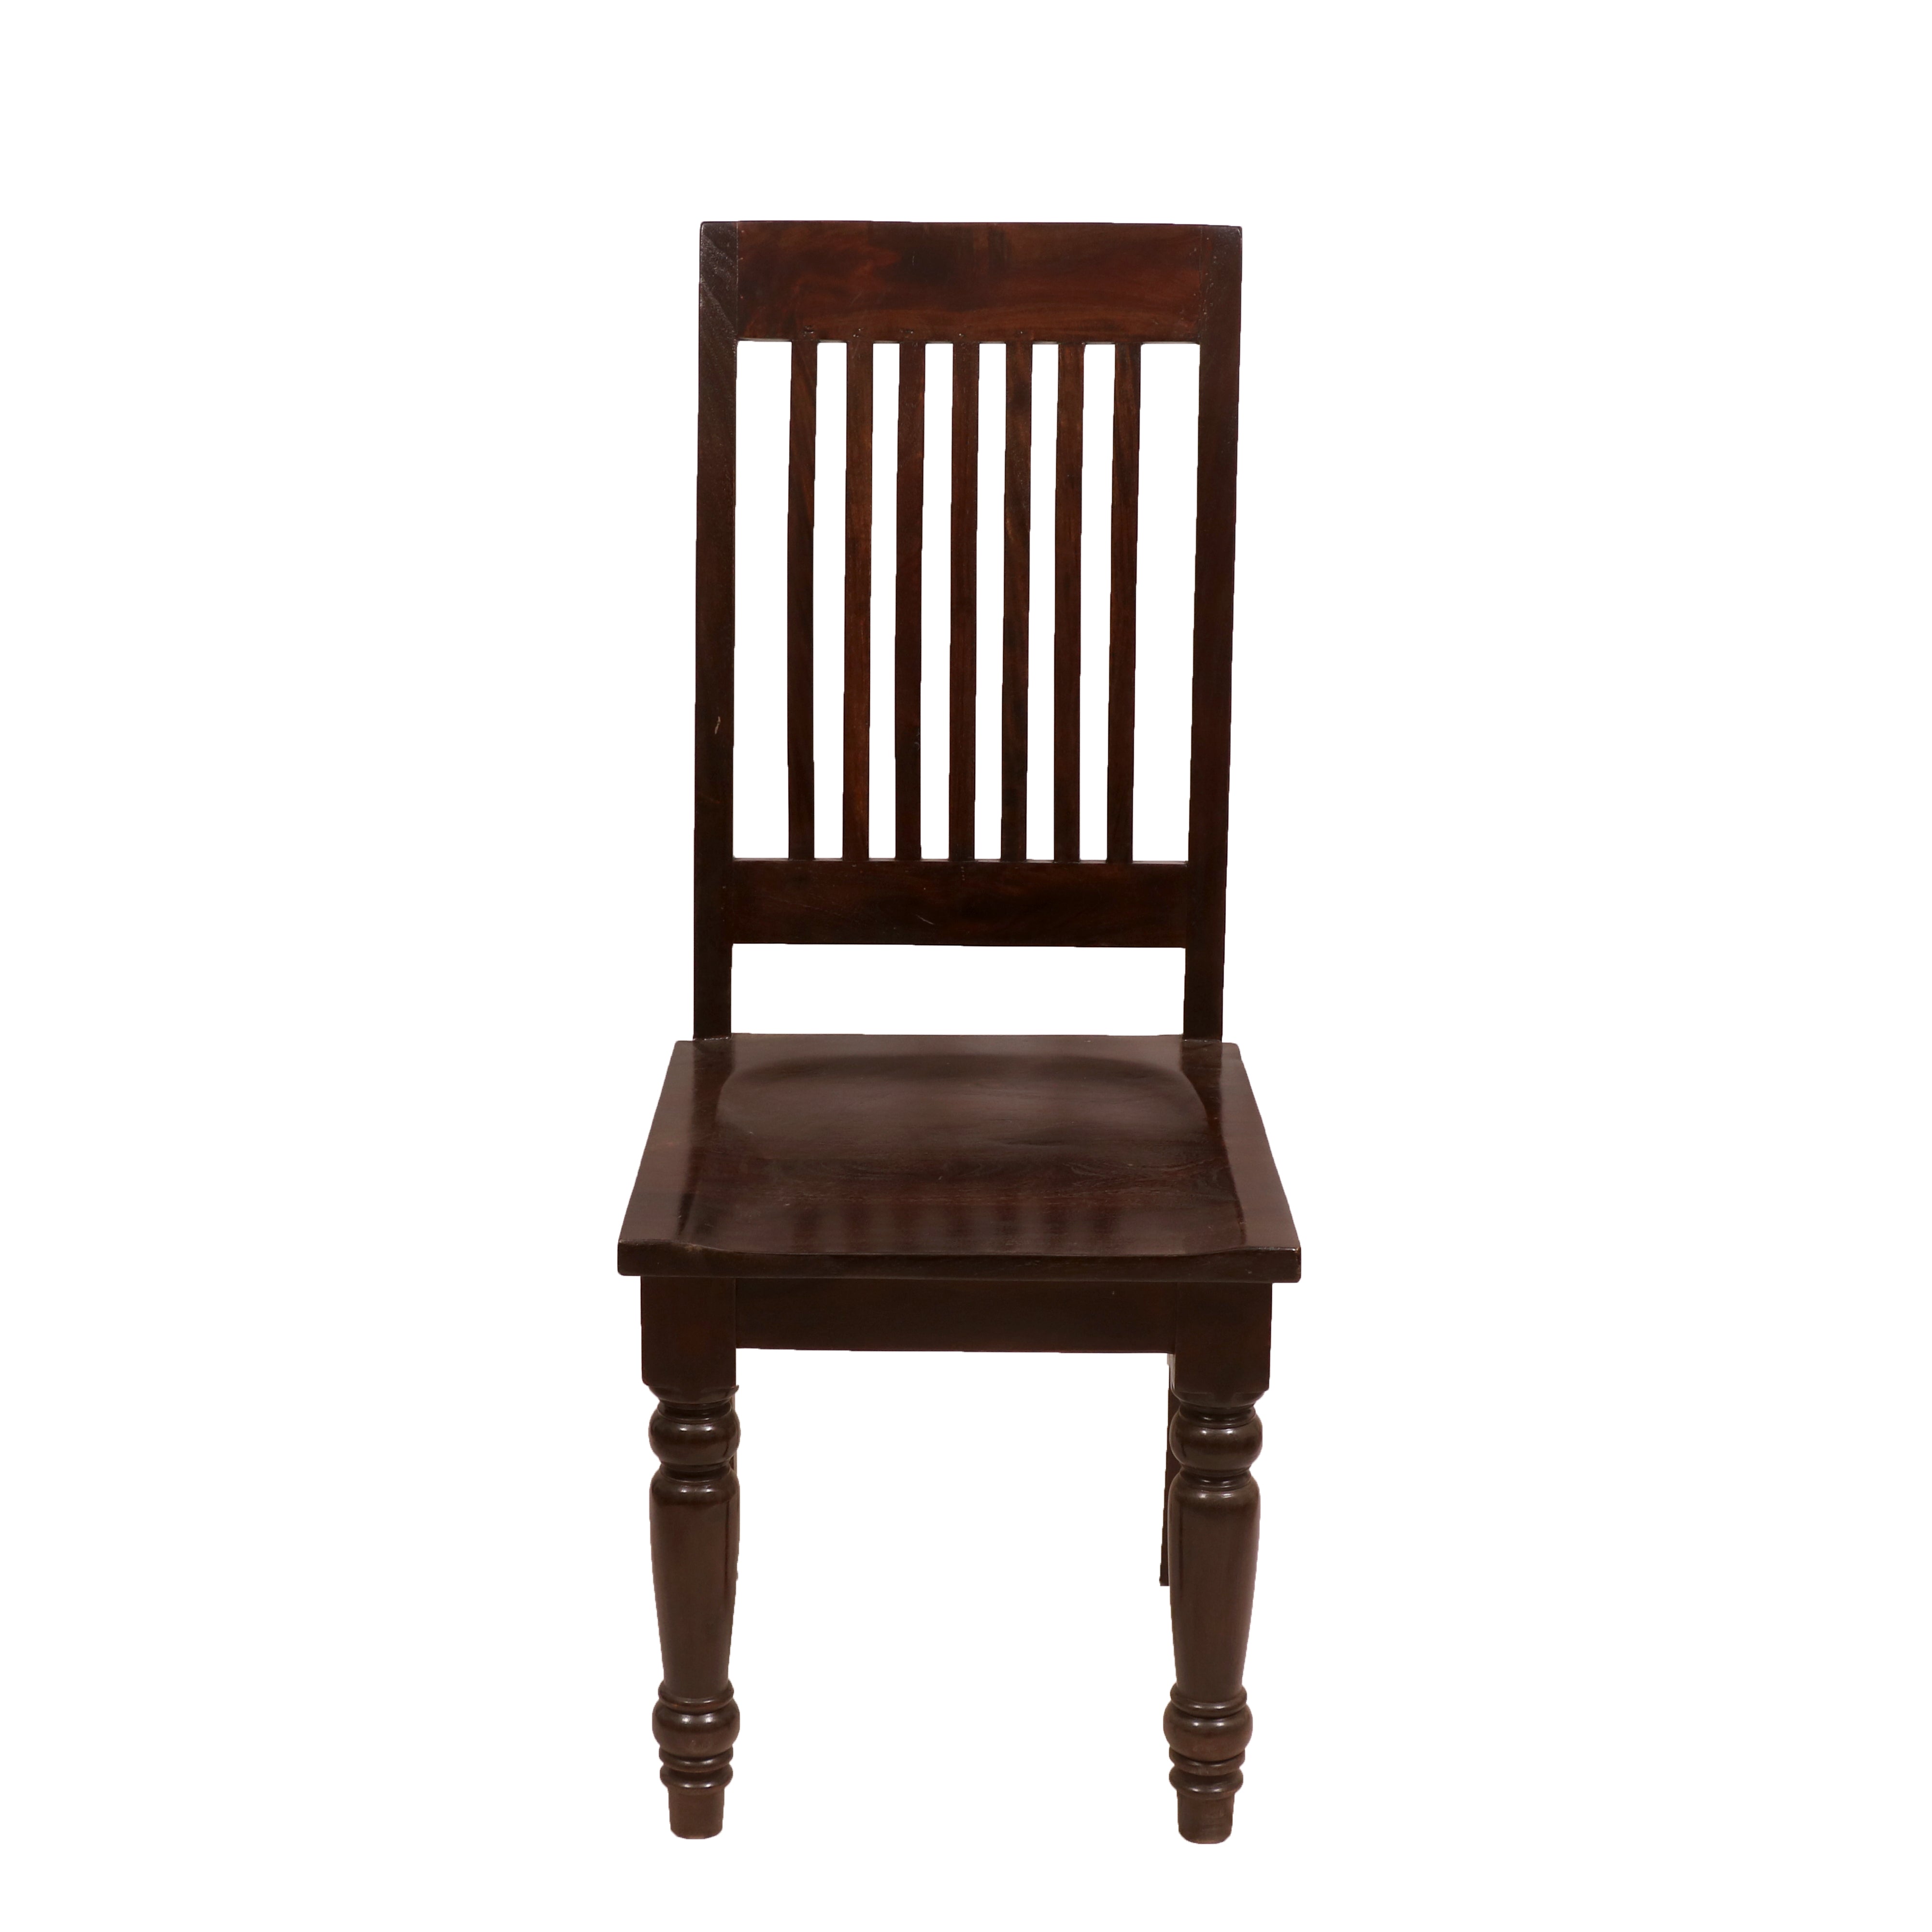 (Set of 2) Colonial Simple Wooden Chair Dining Chair